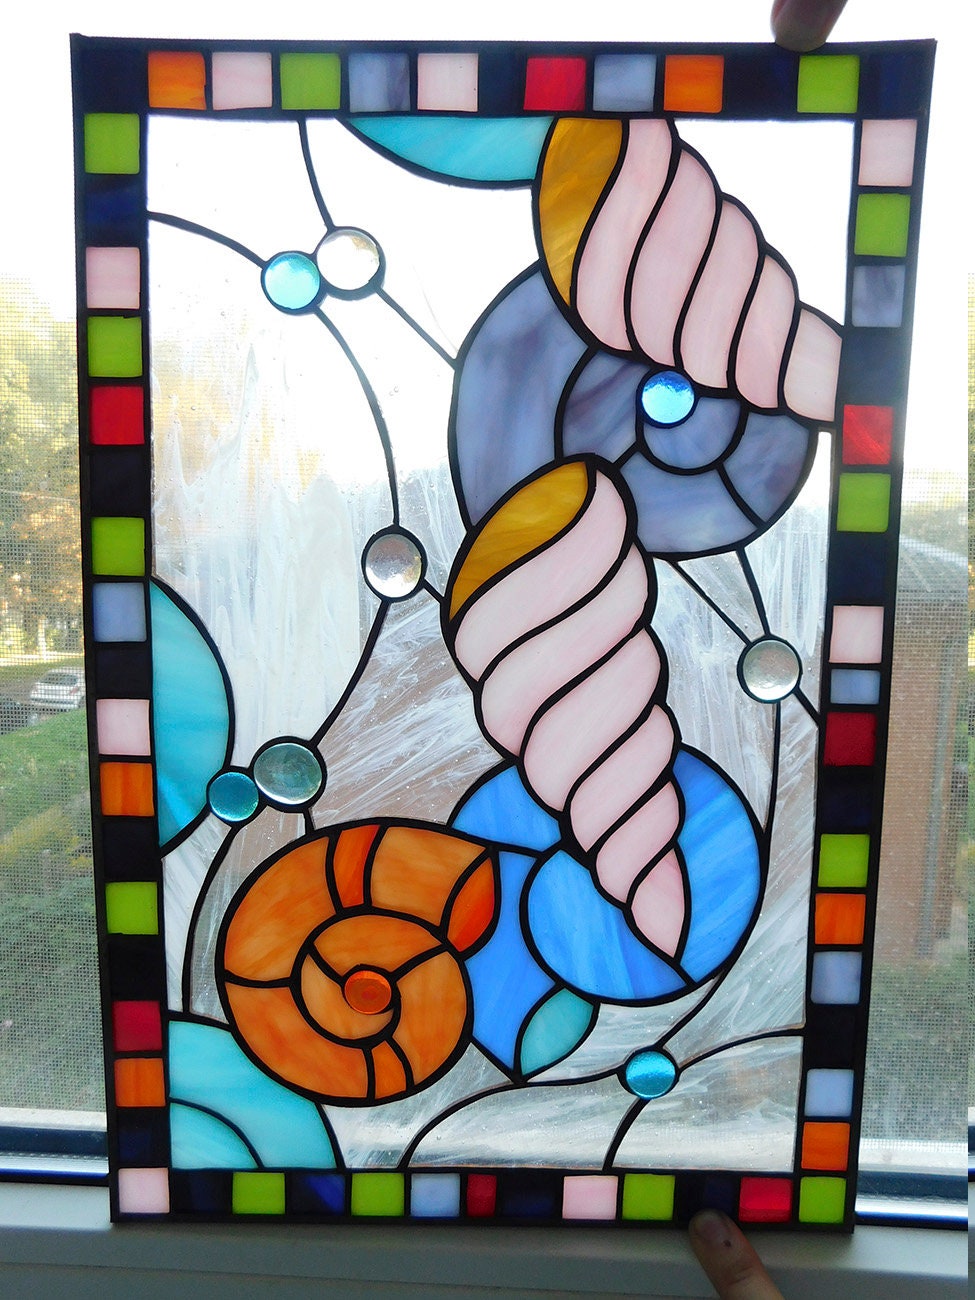 Iridescent Scallop Seashell Stained Glass & Beveled Window